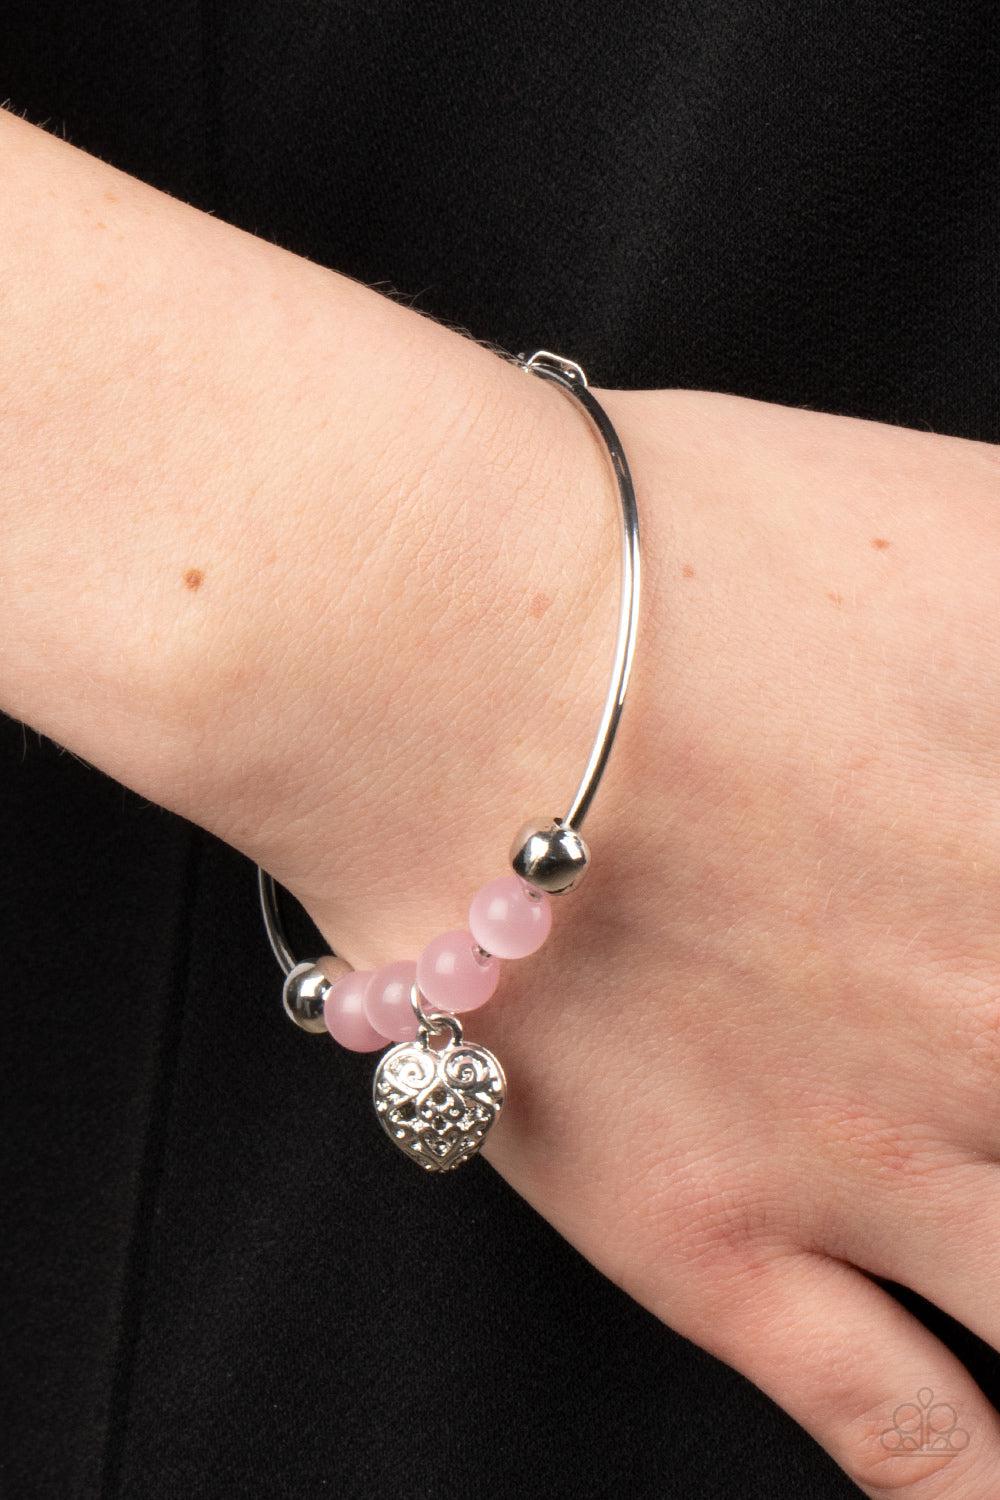 Vintage Vows Pink Heart Charm Bangle Bracelet - Paparazzi Accessories-on model - CarasShop.com - $5 Jewelry by Cara Jewels